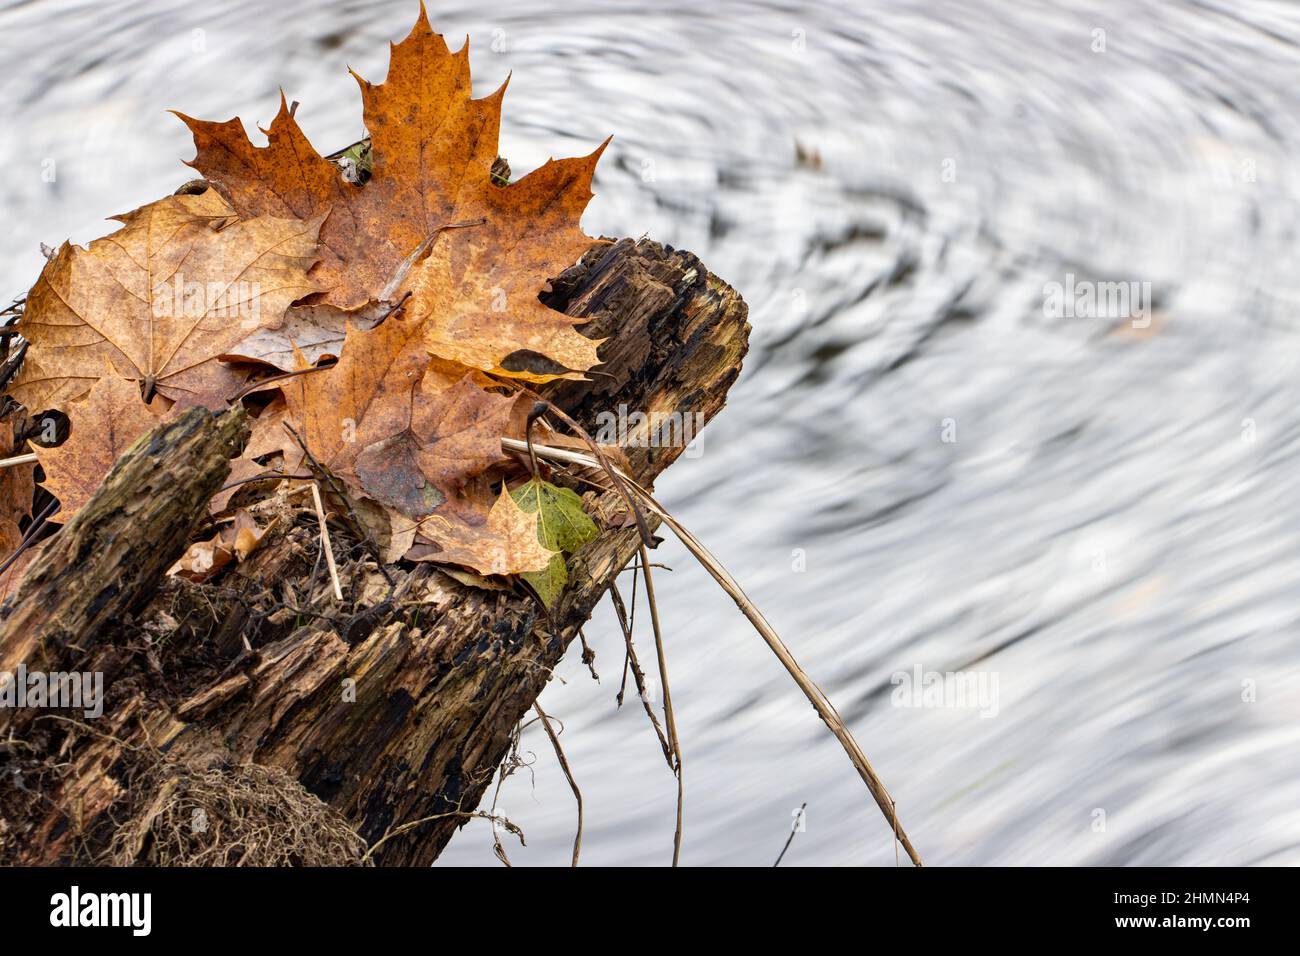 The fallen leaves on a tree stump, on the background of circulating foam on the creek Stock Photo